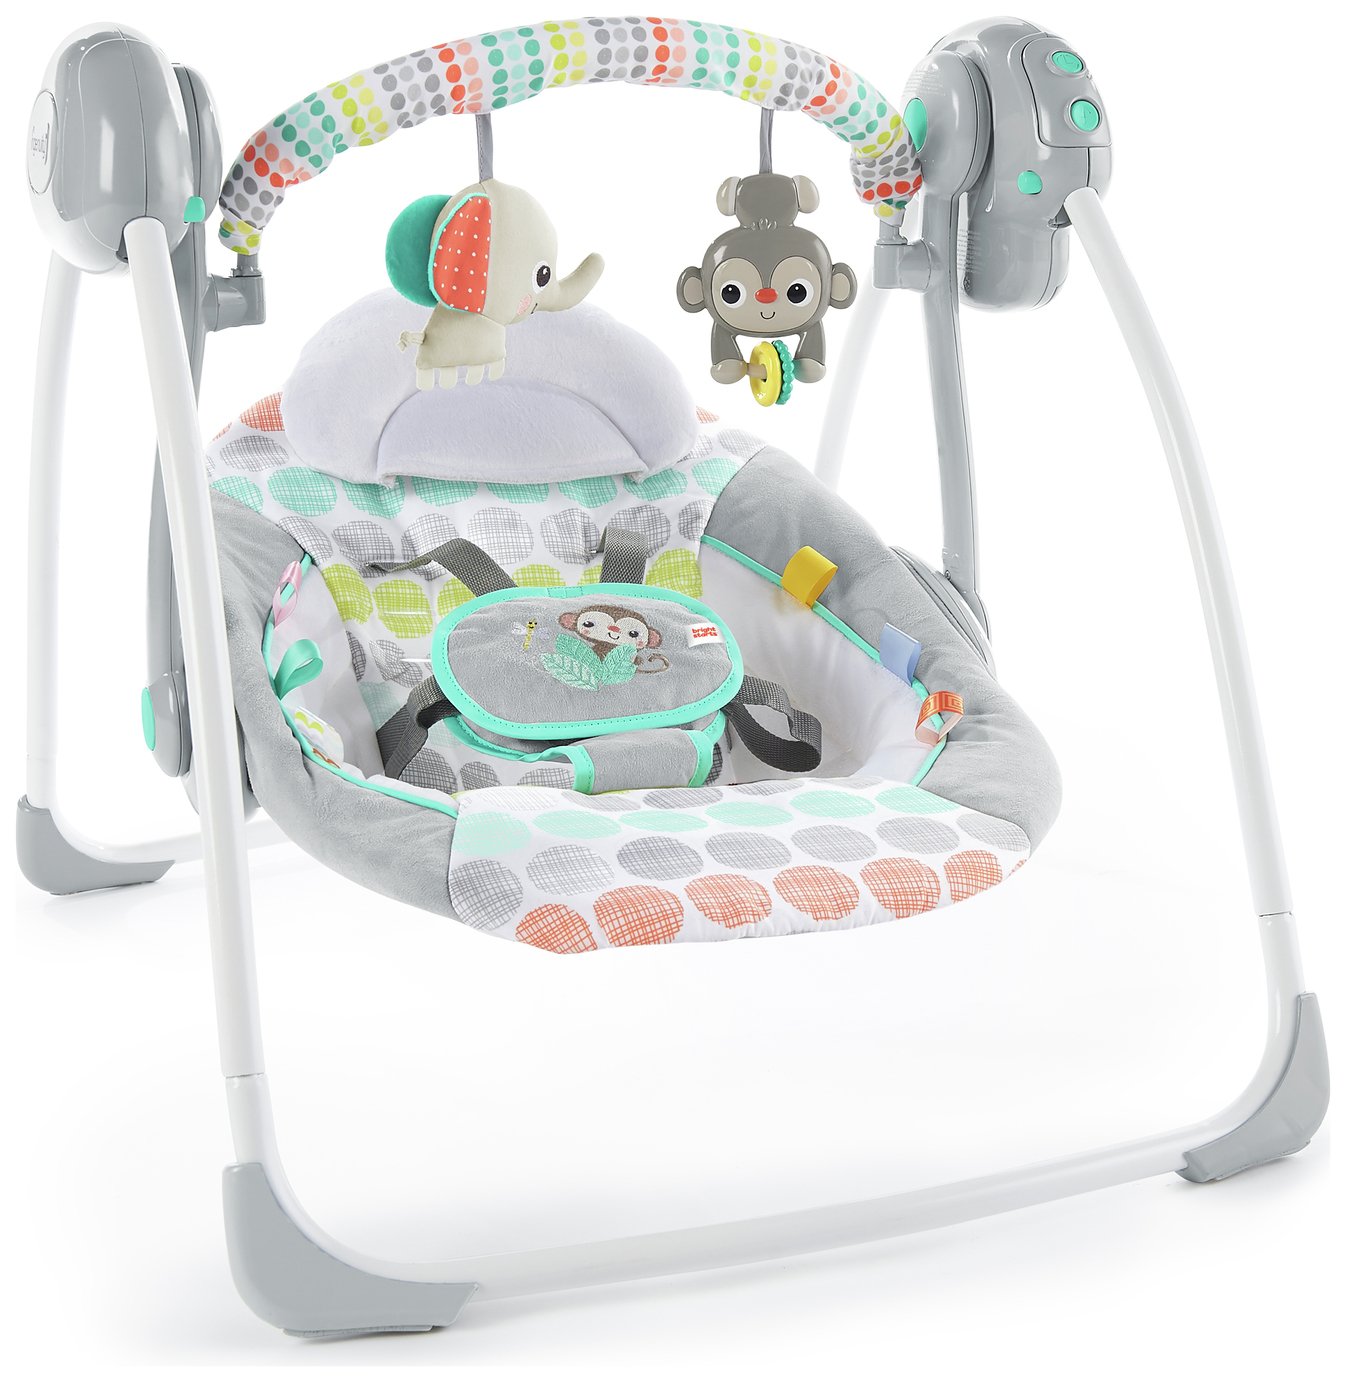 Bright Starts Whimsical Wild Portable Swing review